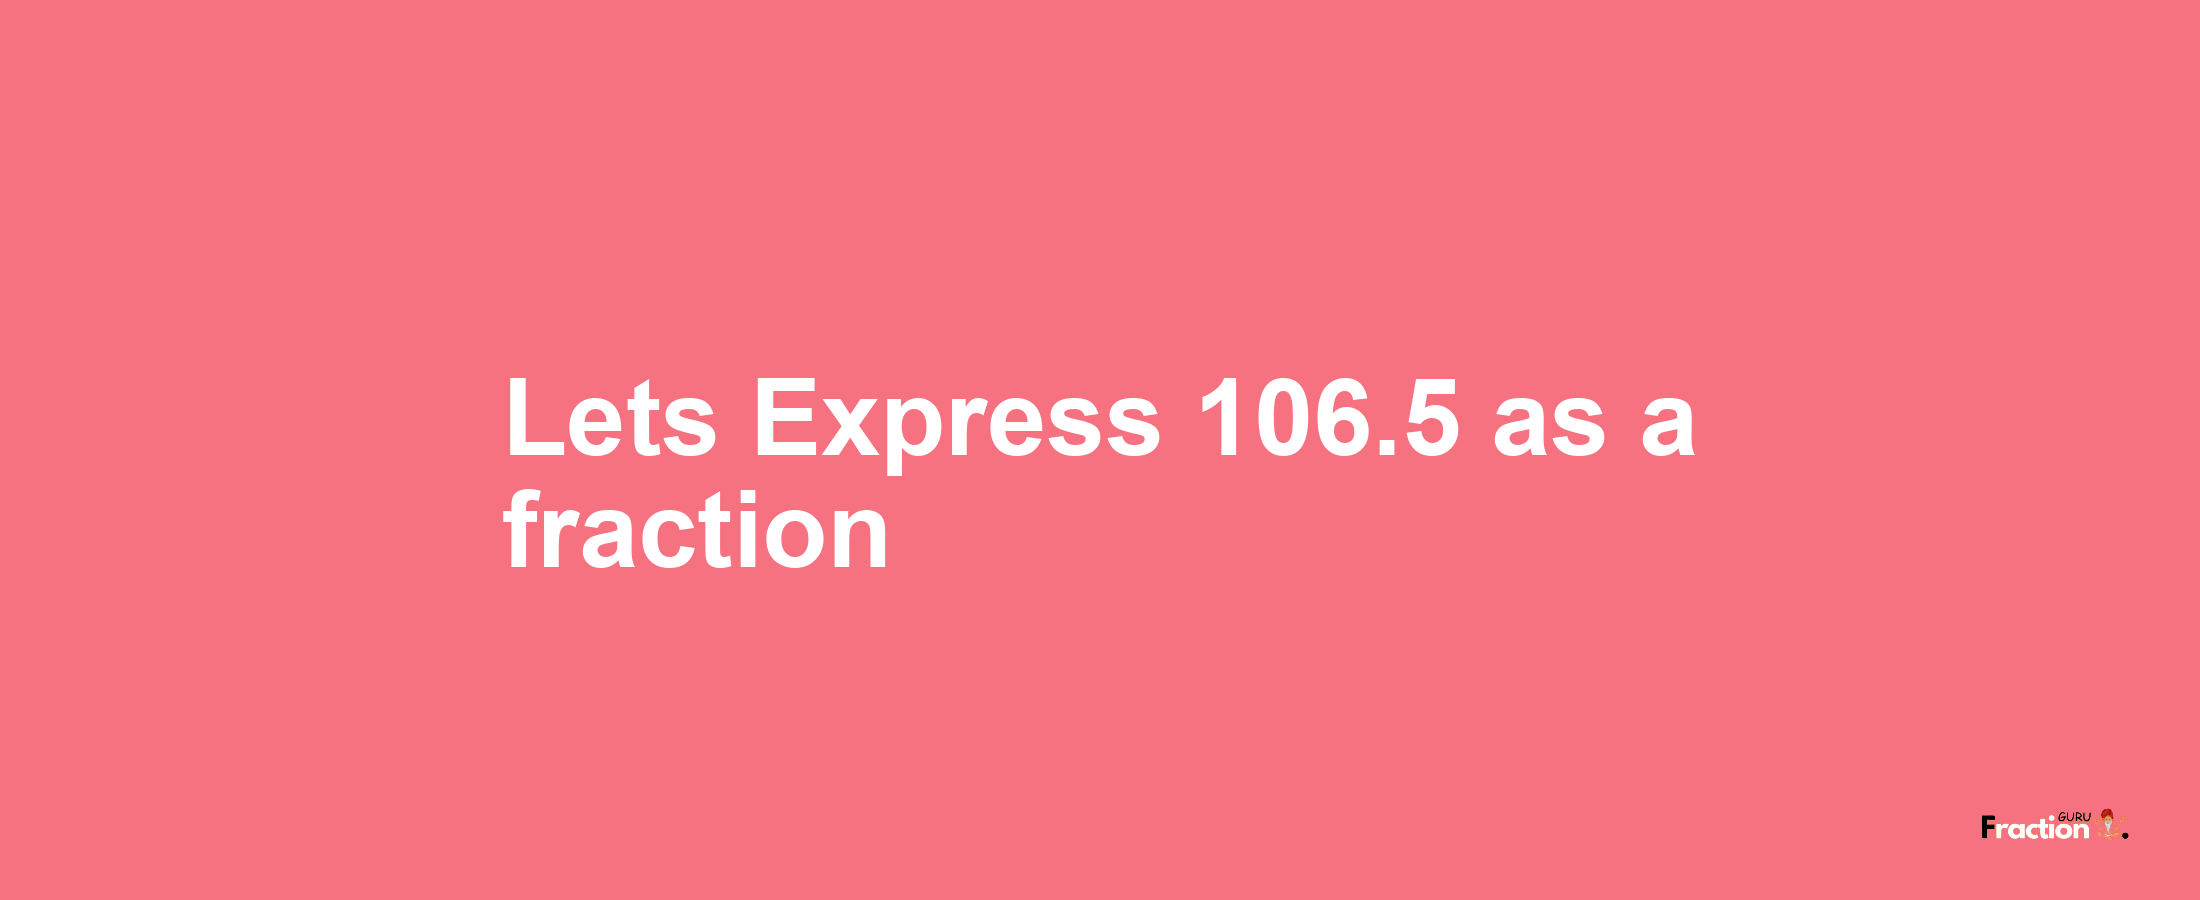 Lets Express 106.5 as afraction